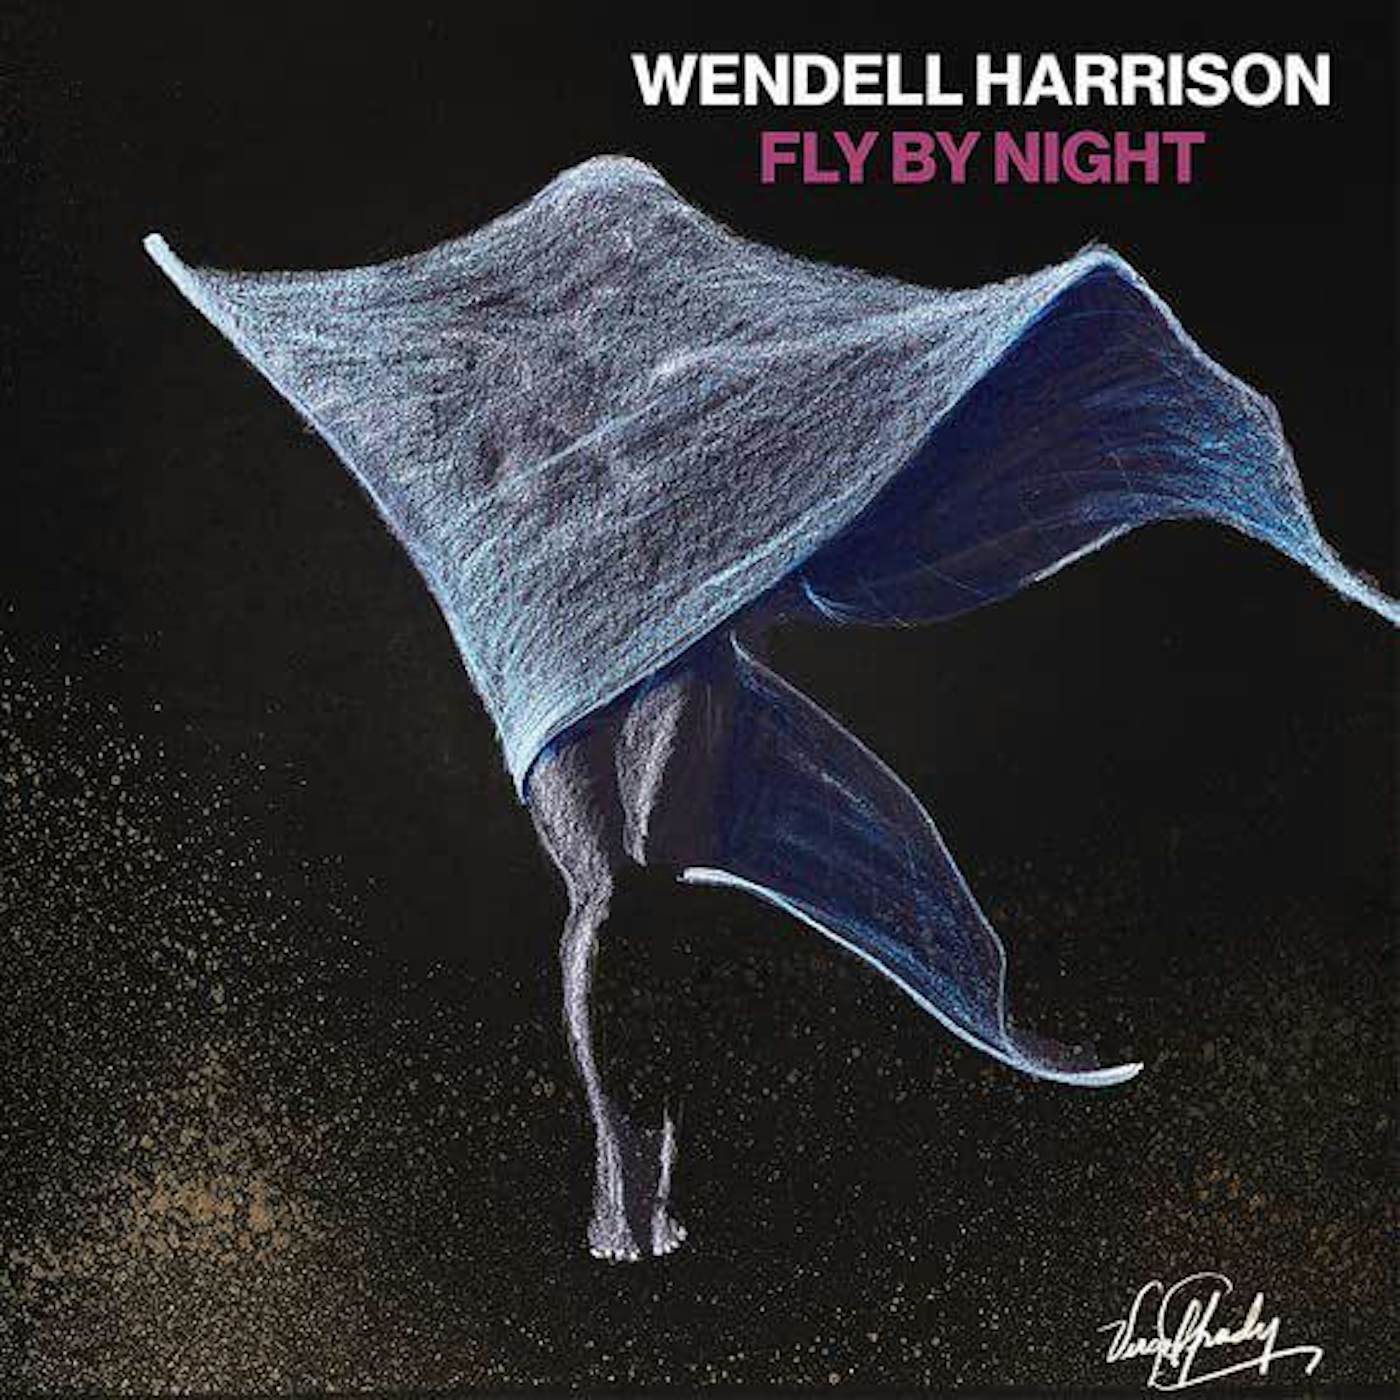 Wendell Harrison Fly By Night (White) Vinyl Record